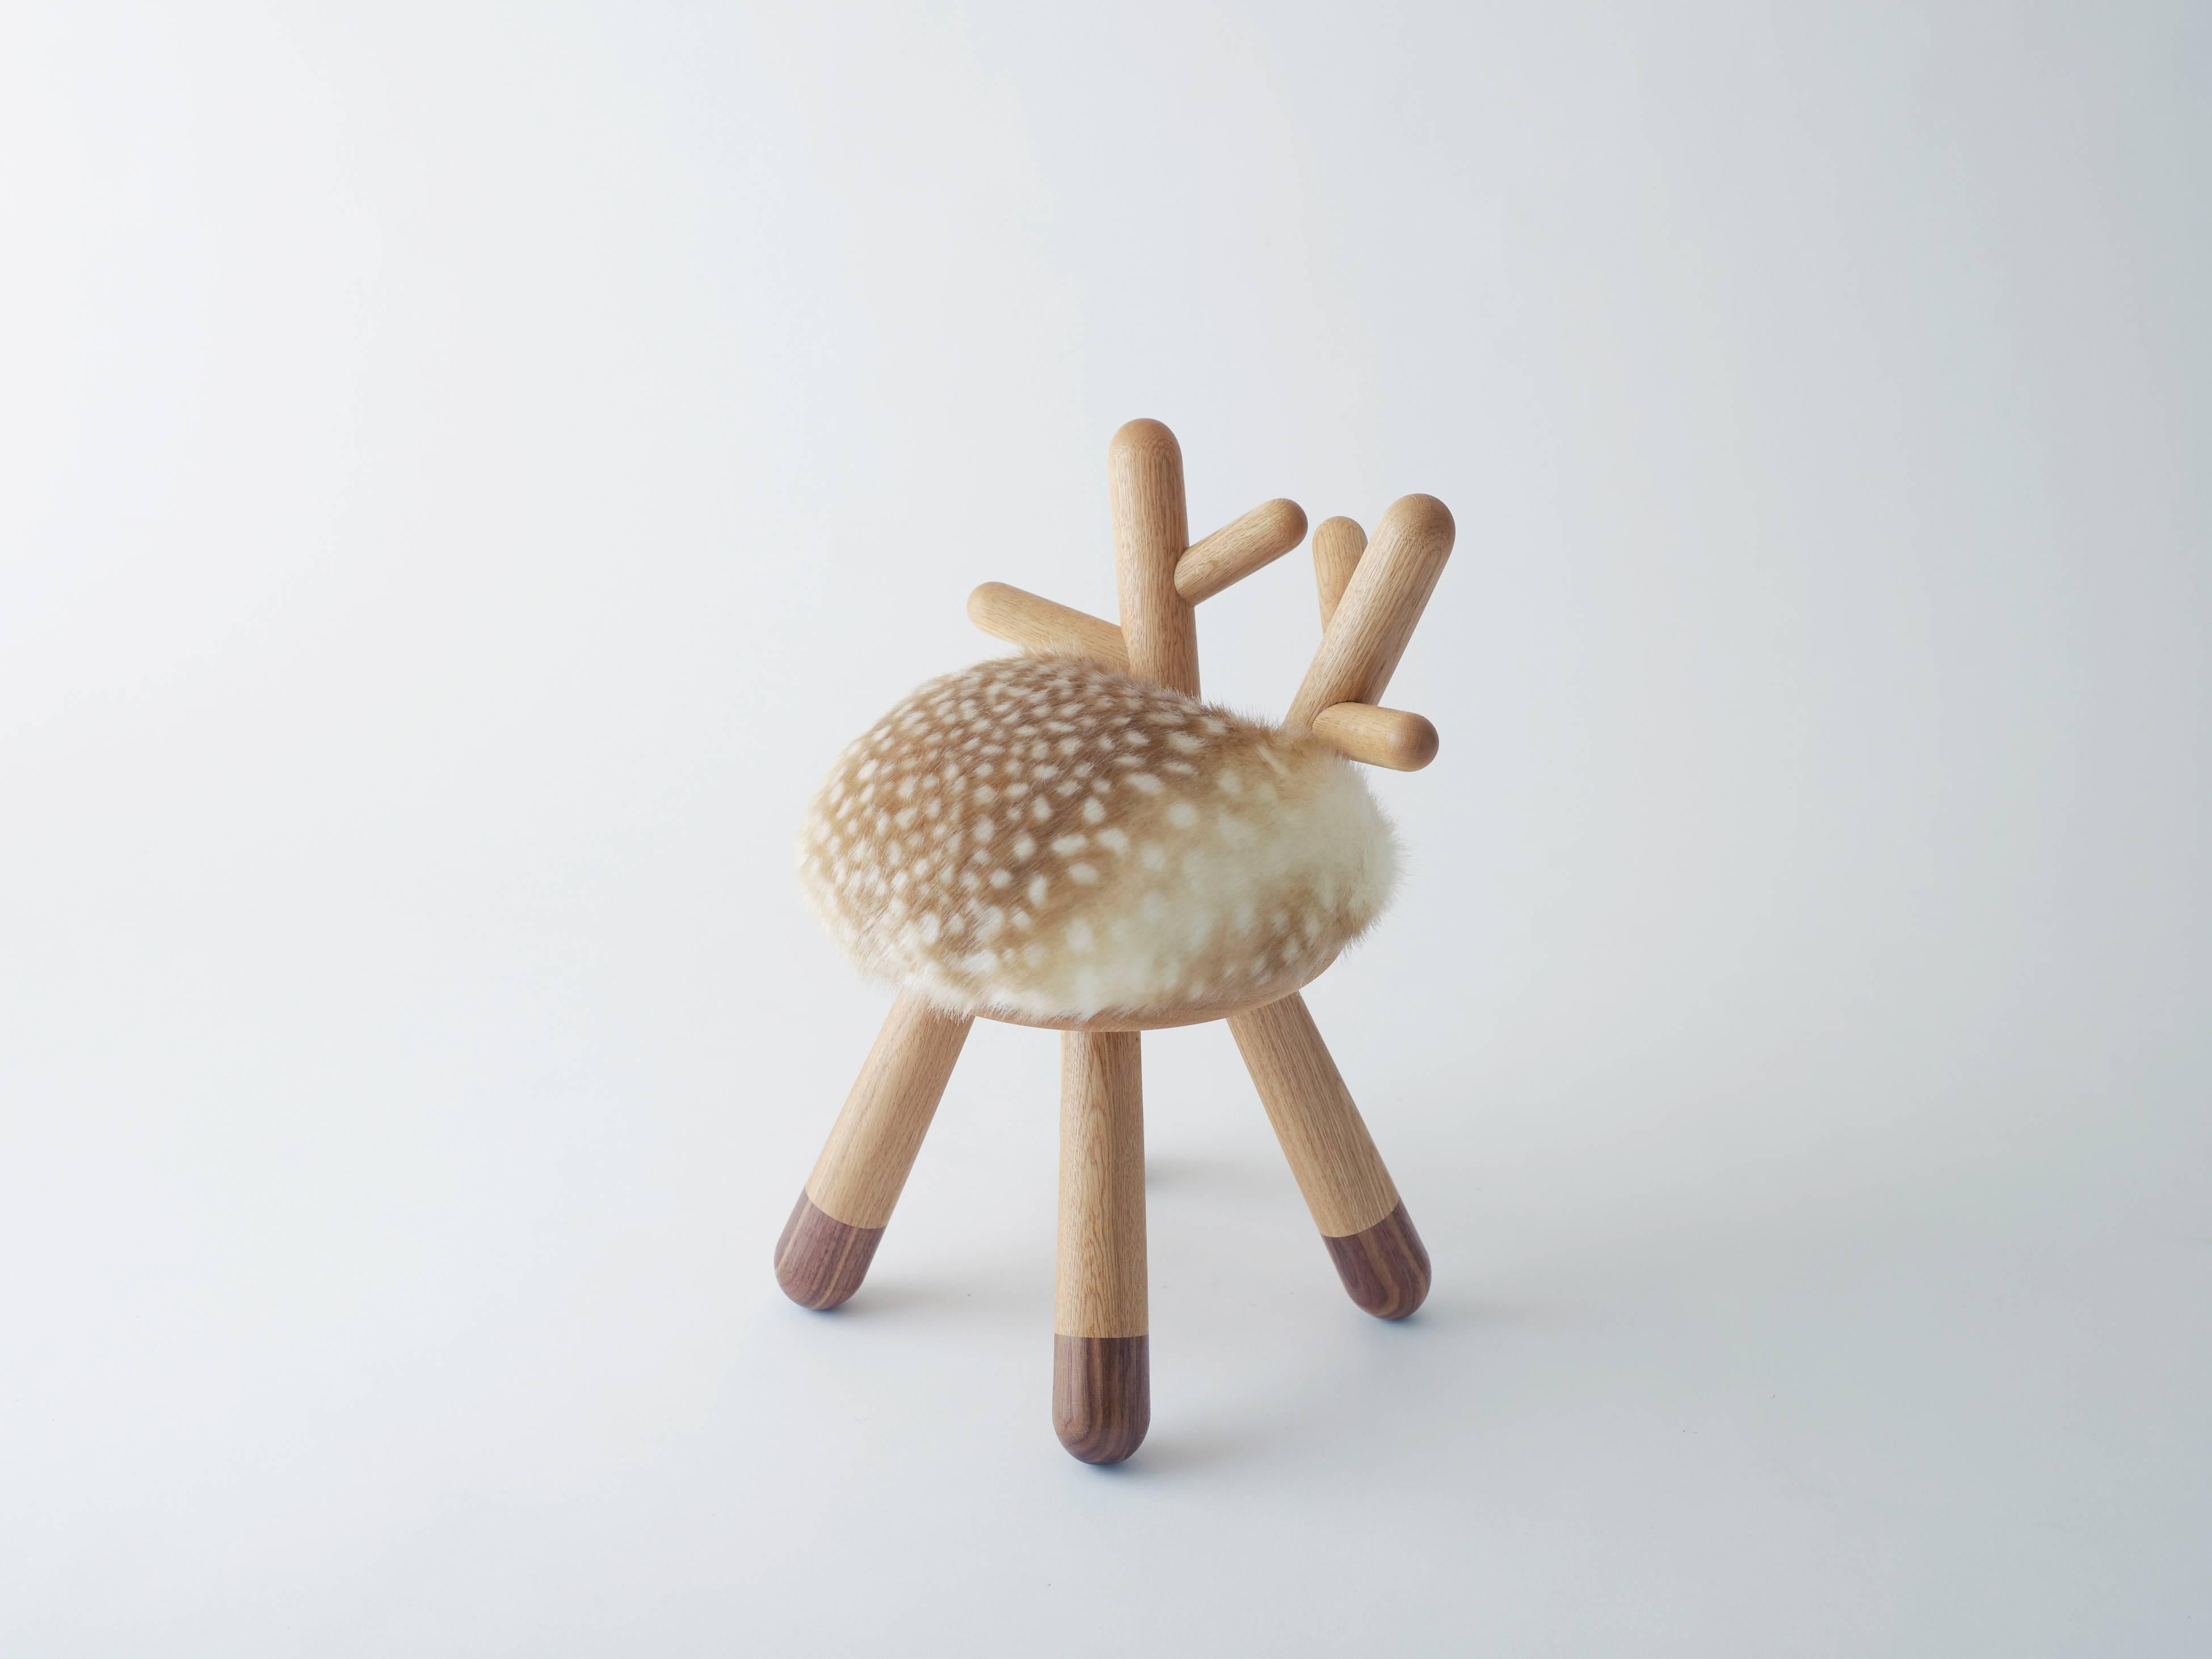 Bambi Chair by Takeshi Sawada for EO in Oak, Walnut and Faux Fur

The series also includes the Sheep Chair. See separate 1stdibs listing. 

Designed by Takeshi Sawada
Produced by EO
Copenhagen, 2015
European oak, American walnut, faux fur (nylon)
H